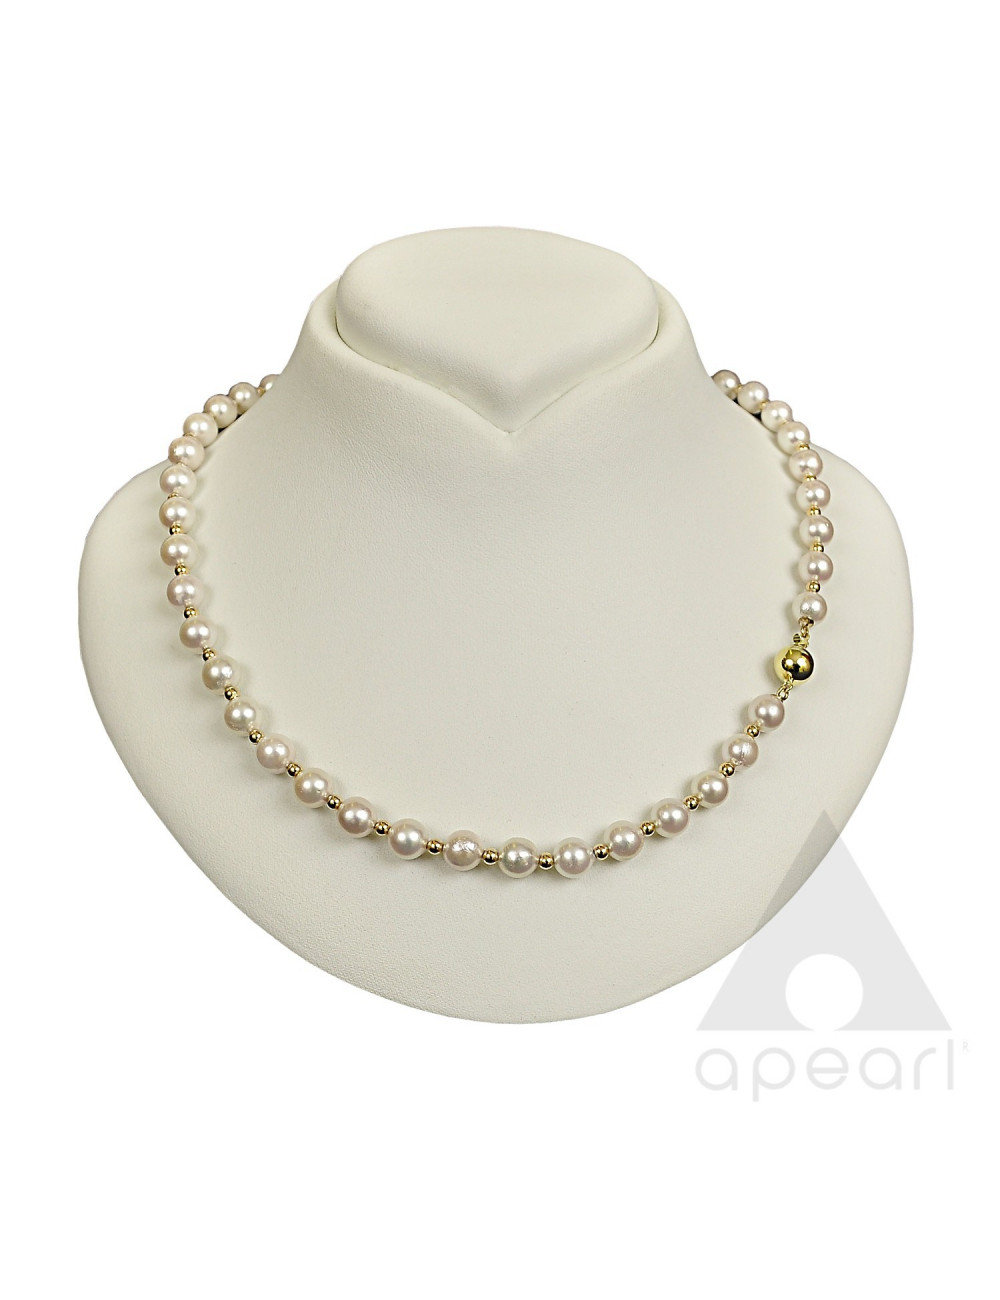 Necklace of white Akoya pearls intertwined with beads made of 14K gold NmO775KUG2